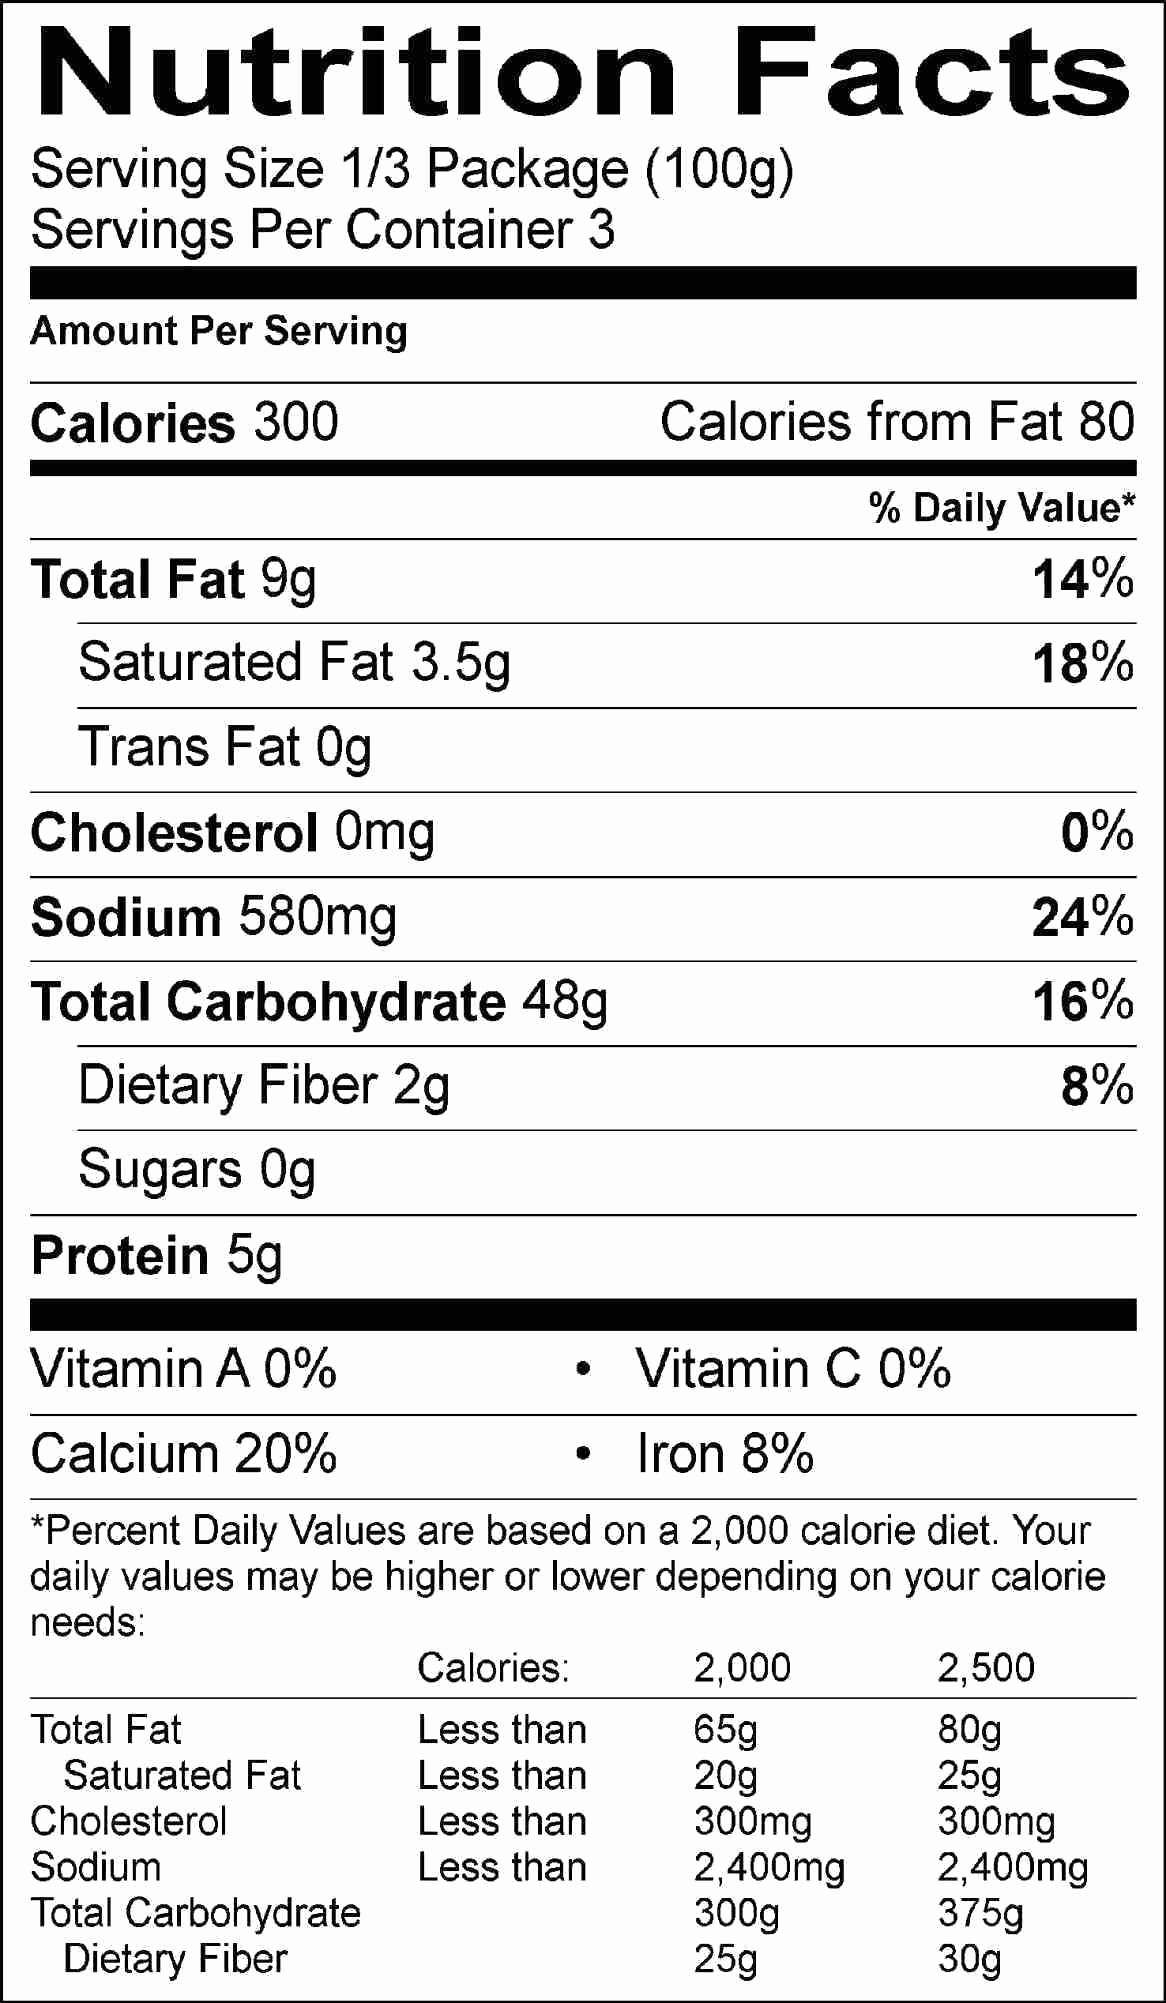 Nutrition Facts Label Template Excel New Template Supplement Facts Template Label Excel and after